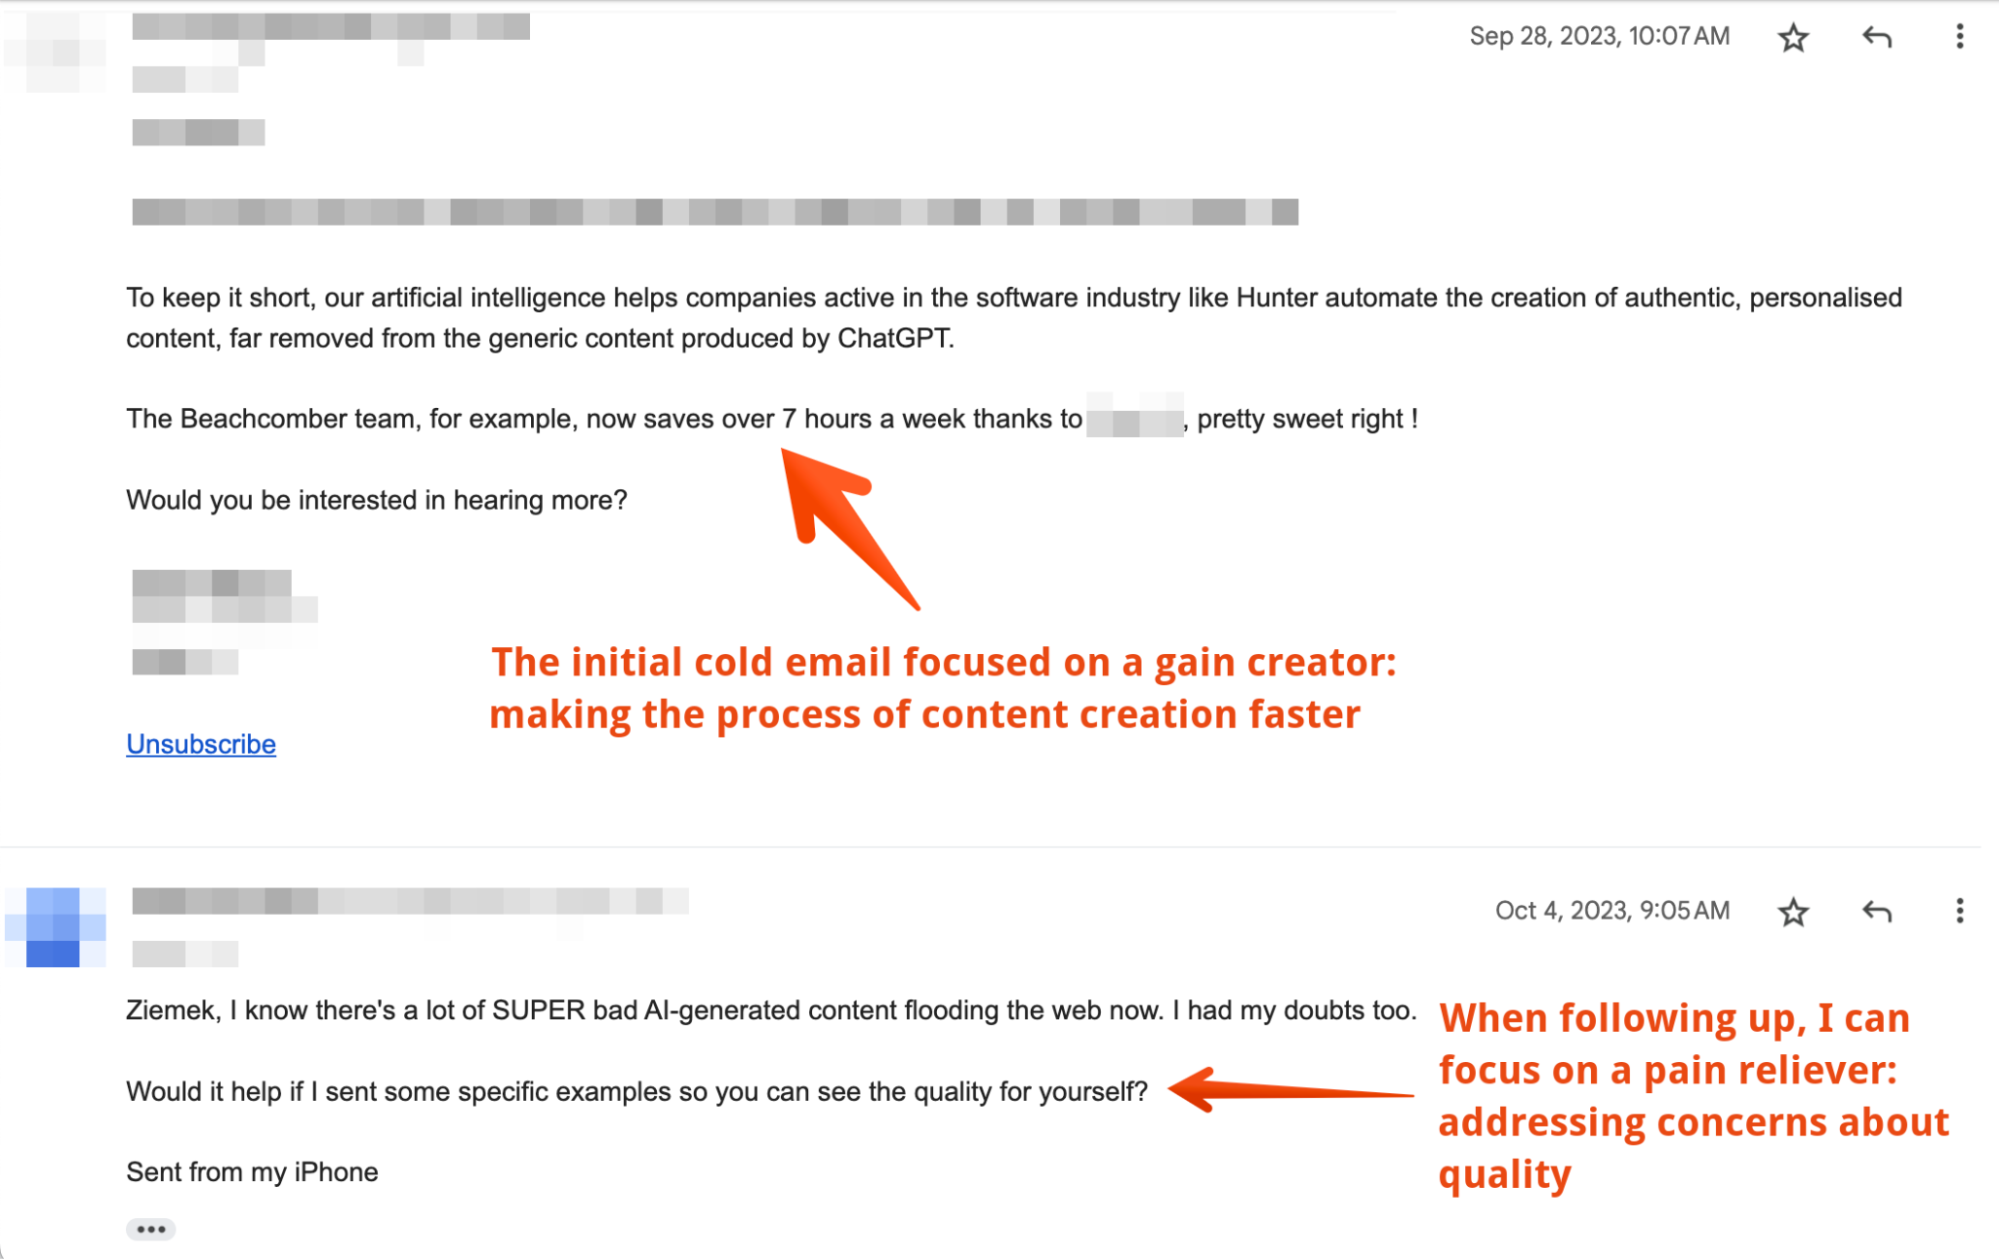 An example of a cold email follow-up that uses a contrasting value point